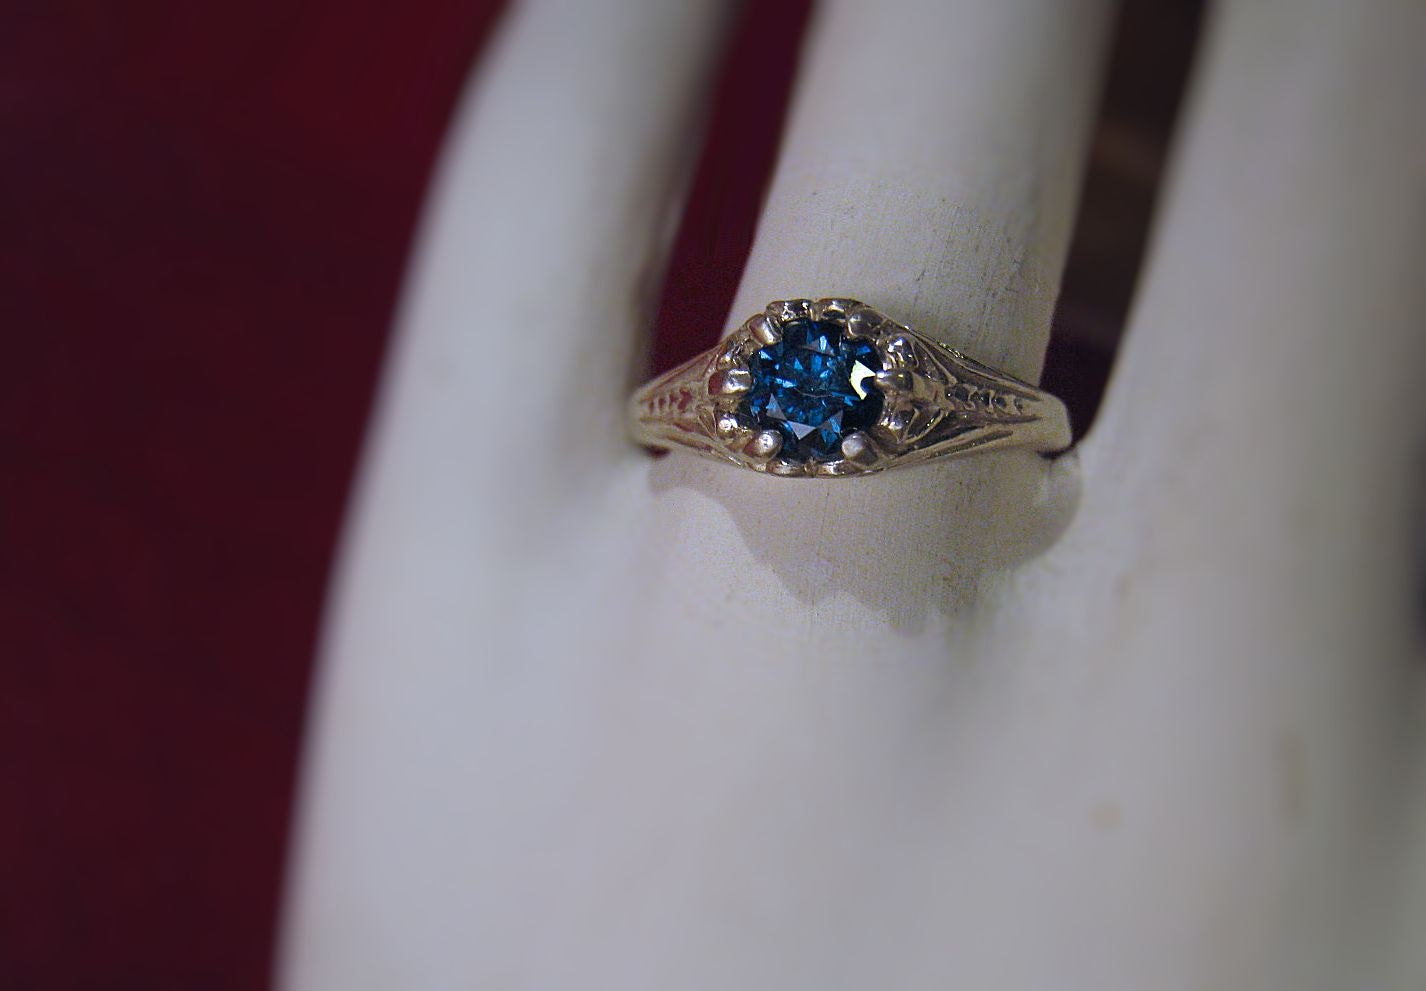 Something Blue Engagement Rings! 13 Most Beautiful Blue-Hued Gemstone Rings  For A Romantic Proposal | Blue engagement ring, Sapphire engagement ring  blue, Colored engagement rings